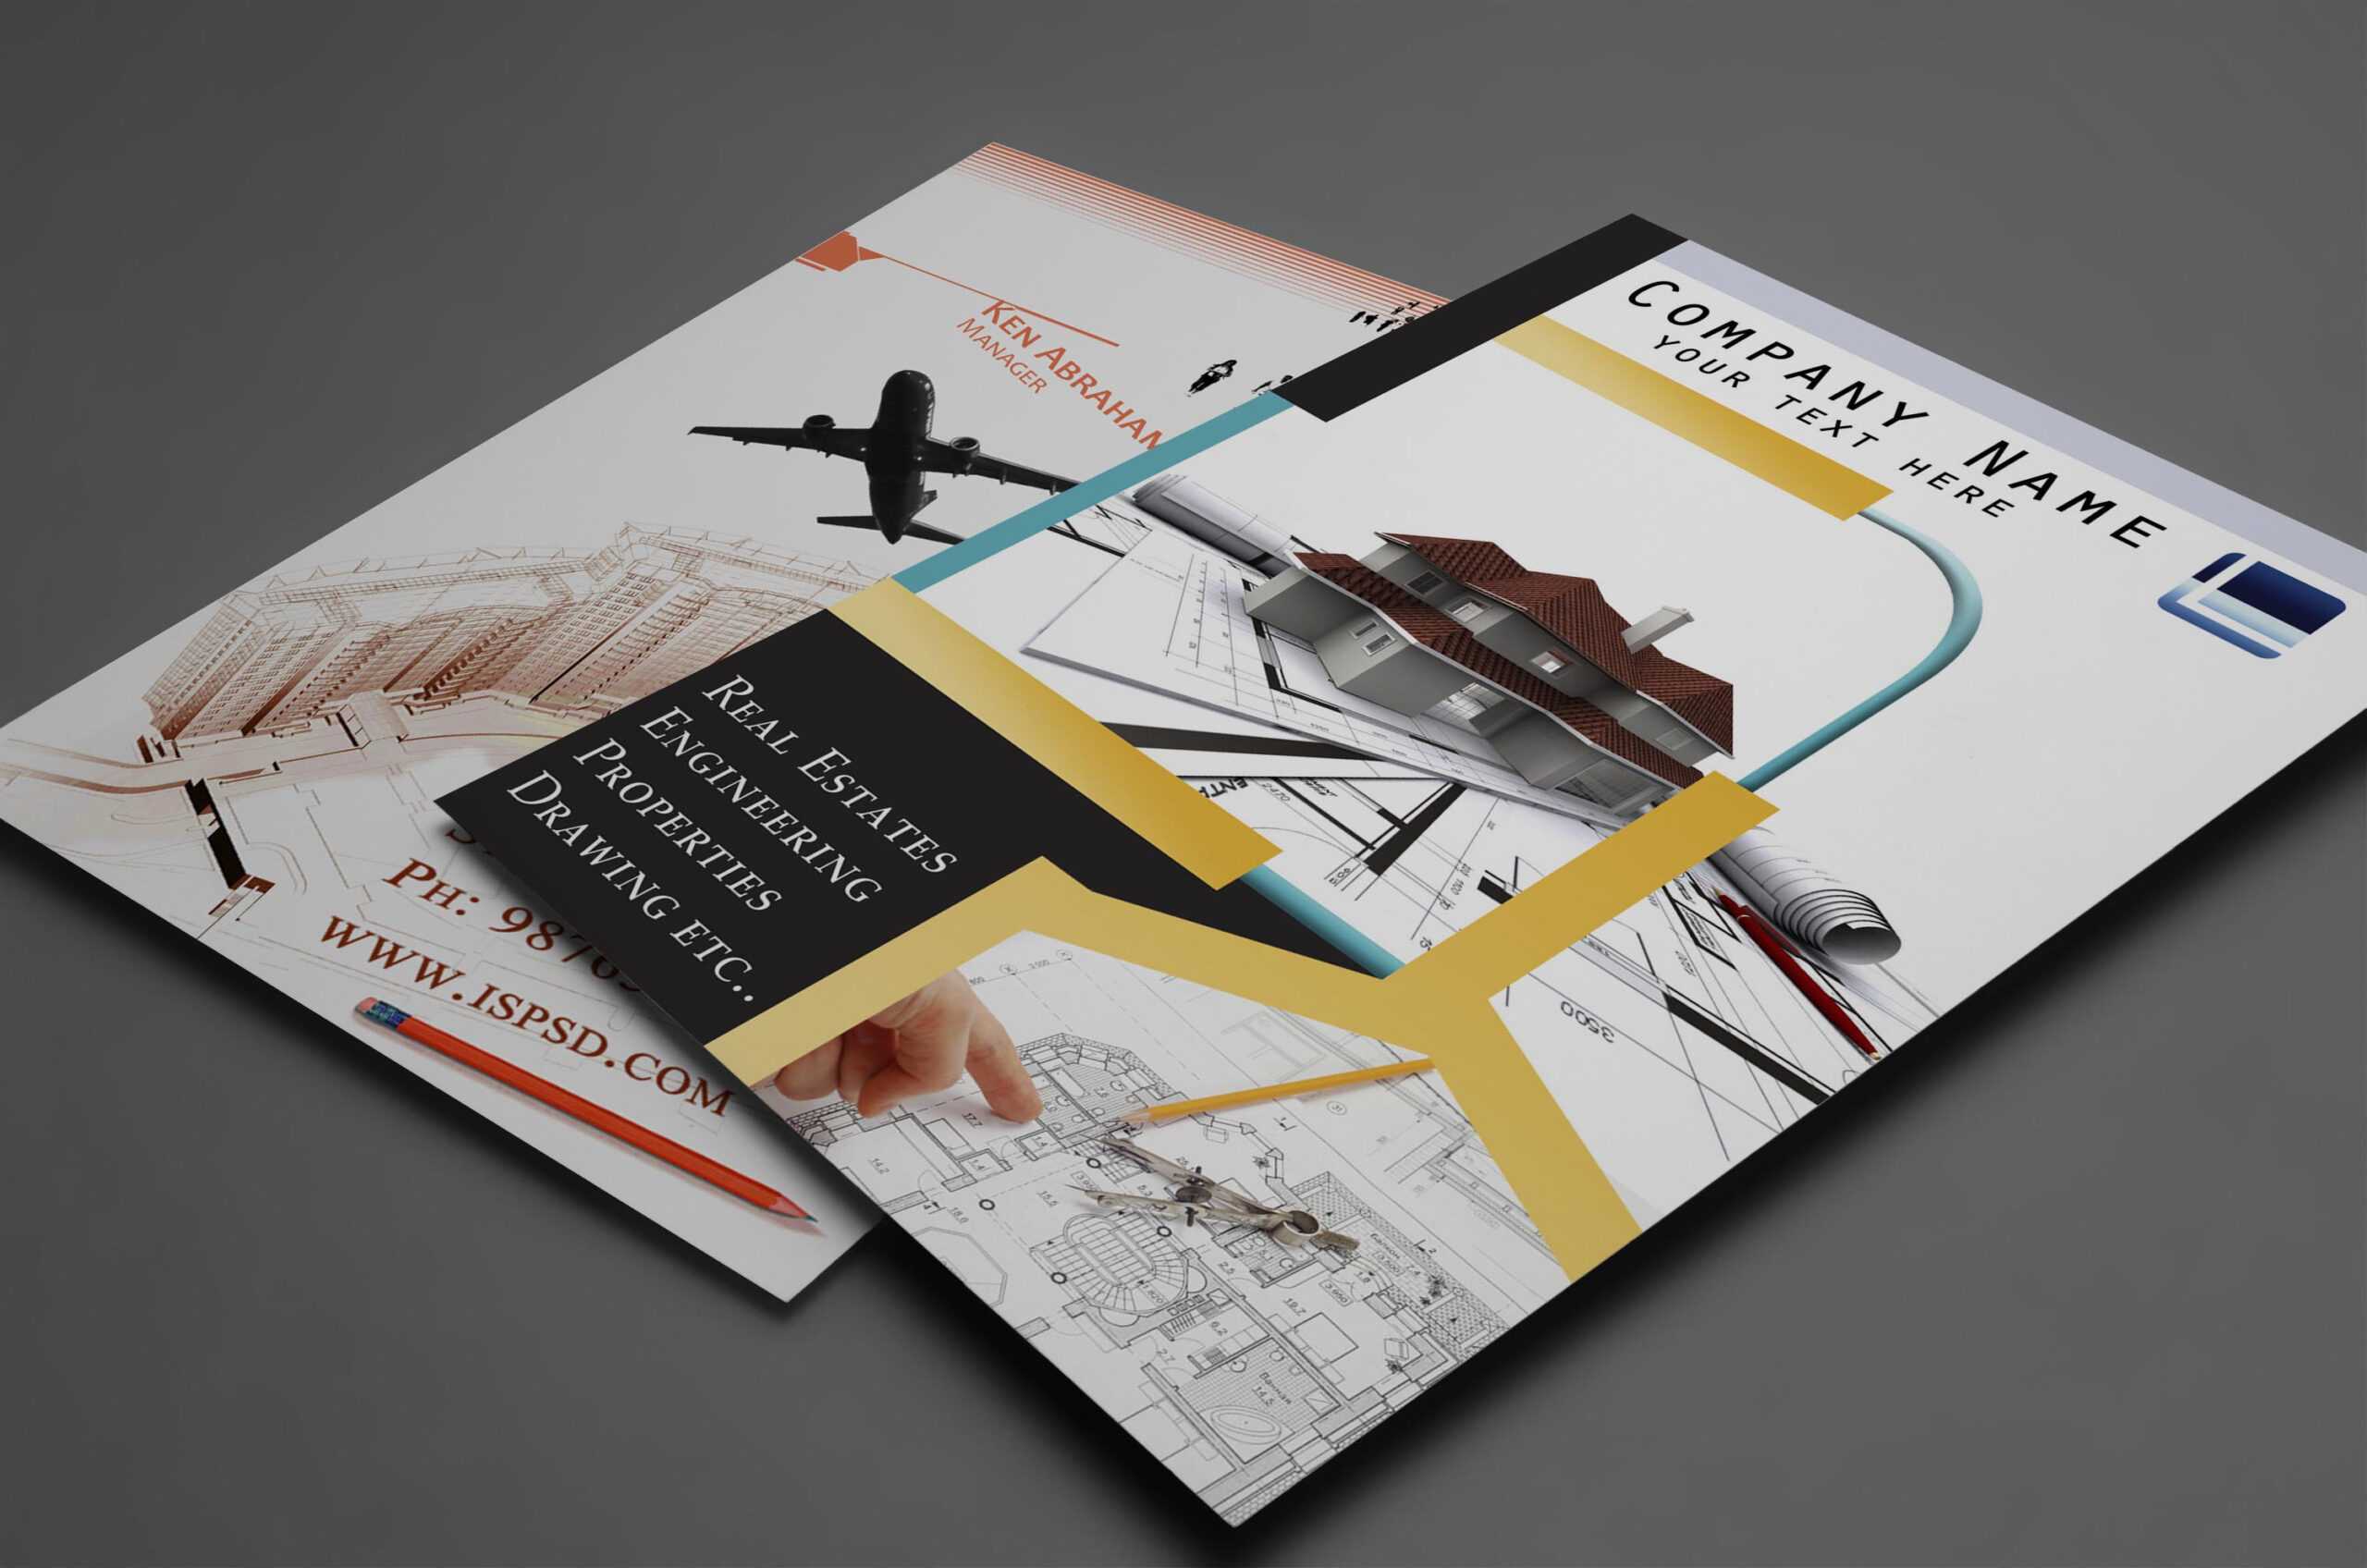 15 A3 Brochure Psd Design Images – Furniture Brochure Throughout Real Estate Brochure Templates Psd Free Download